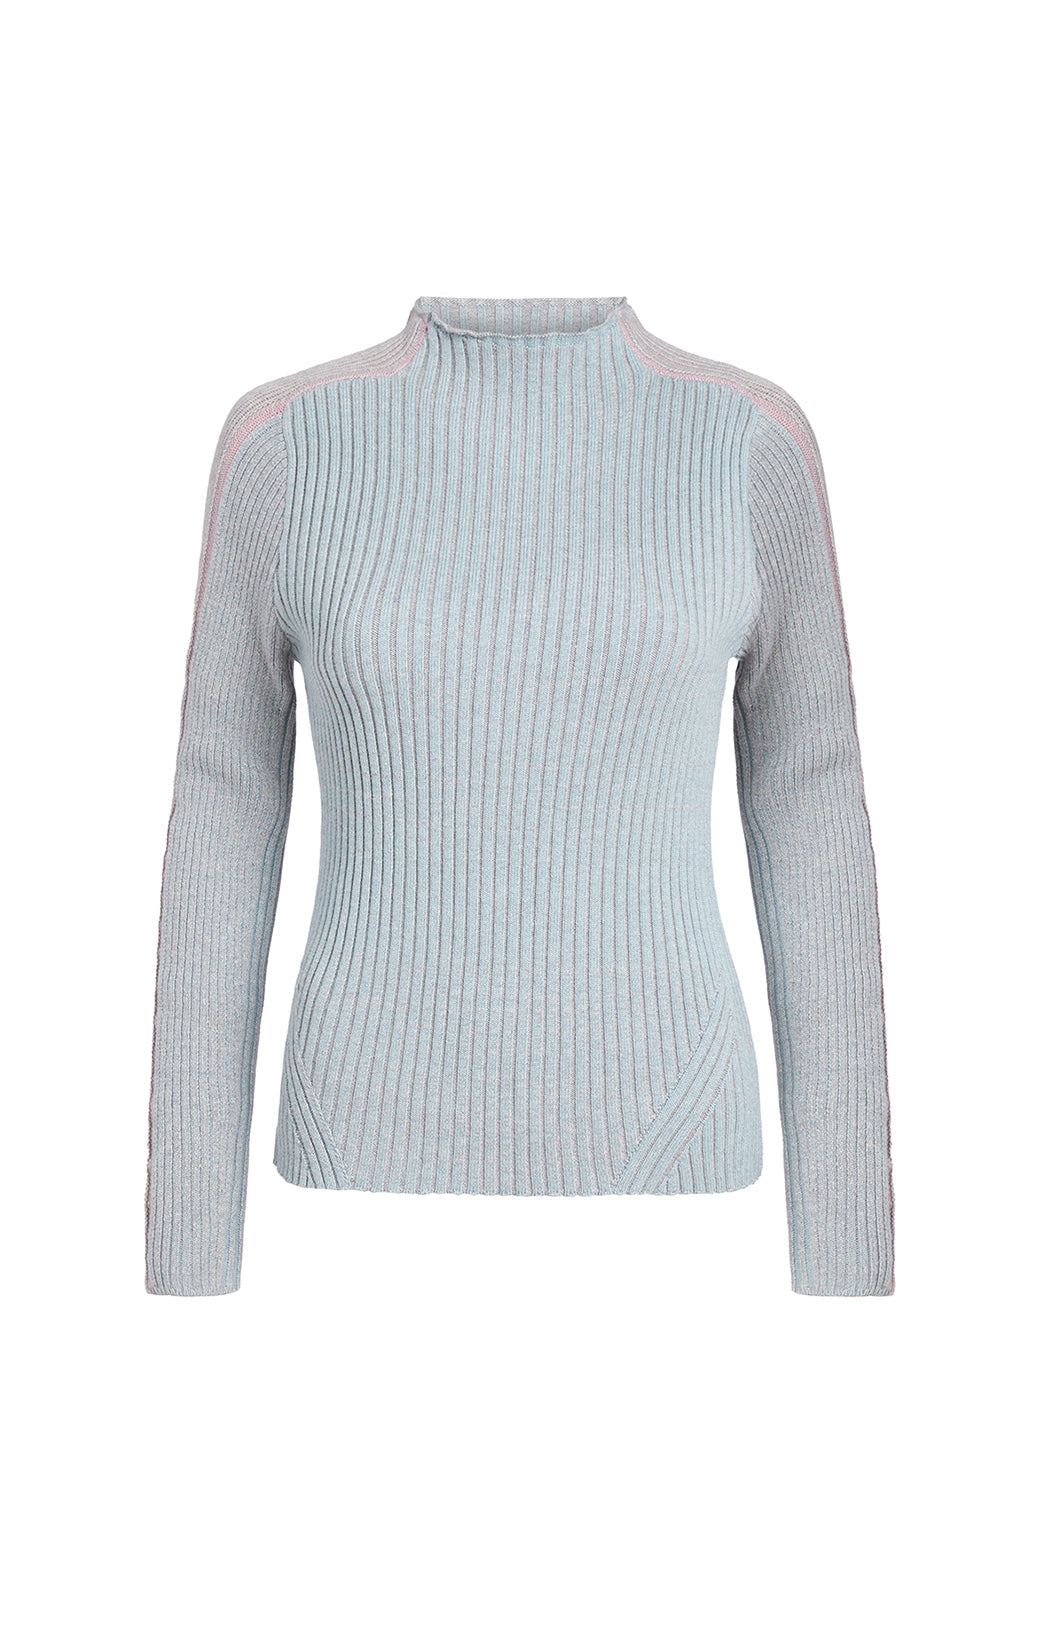 Eclipse - Cashmere-Softened Turtleneck With Shirt Trim - Product Image